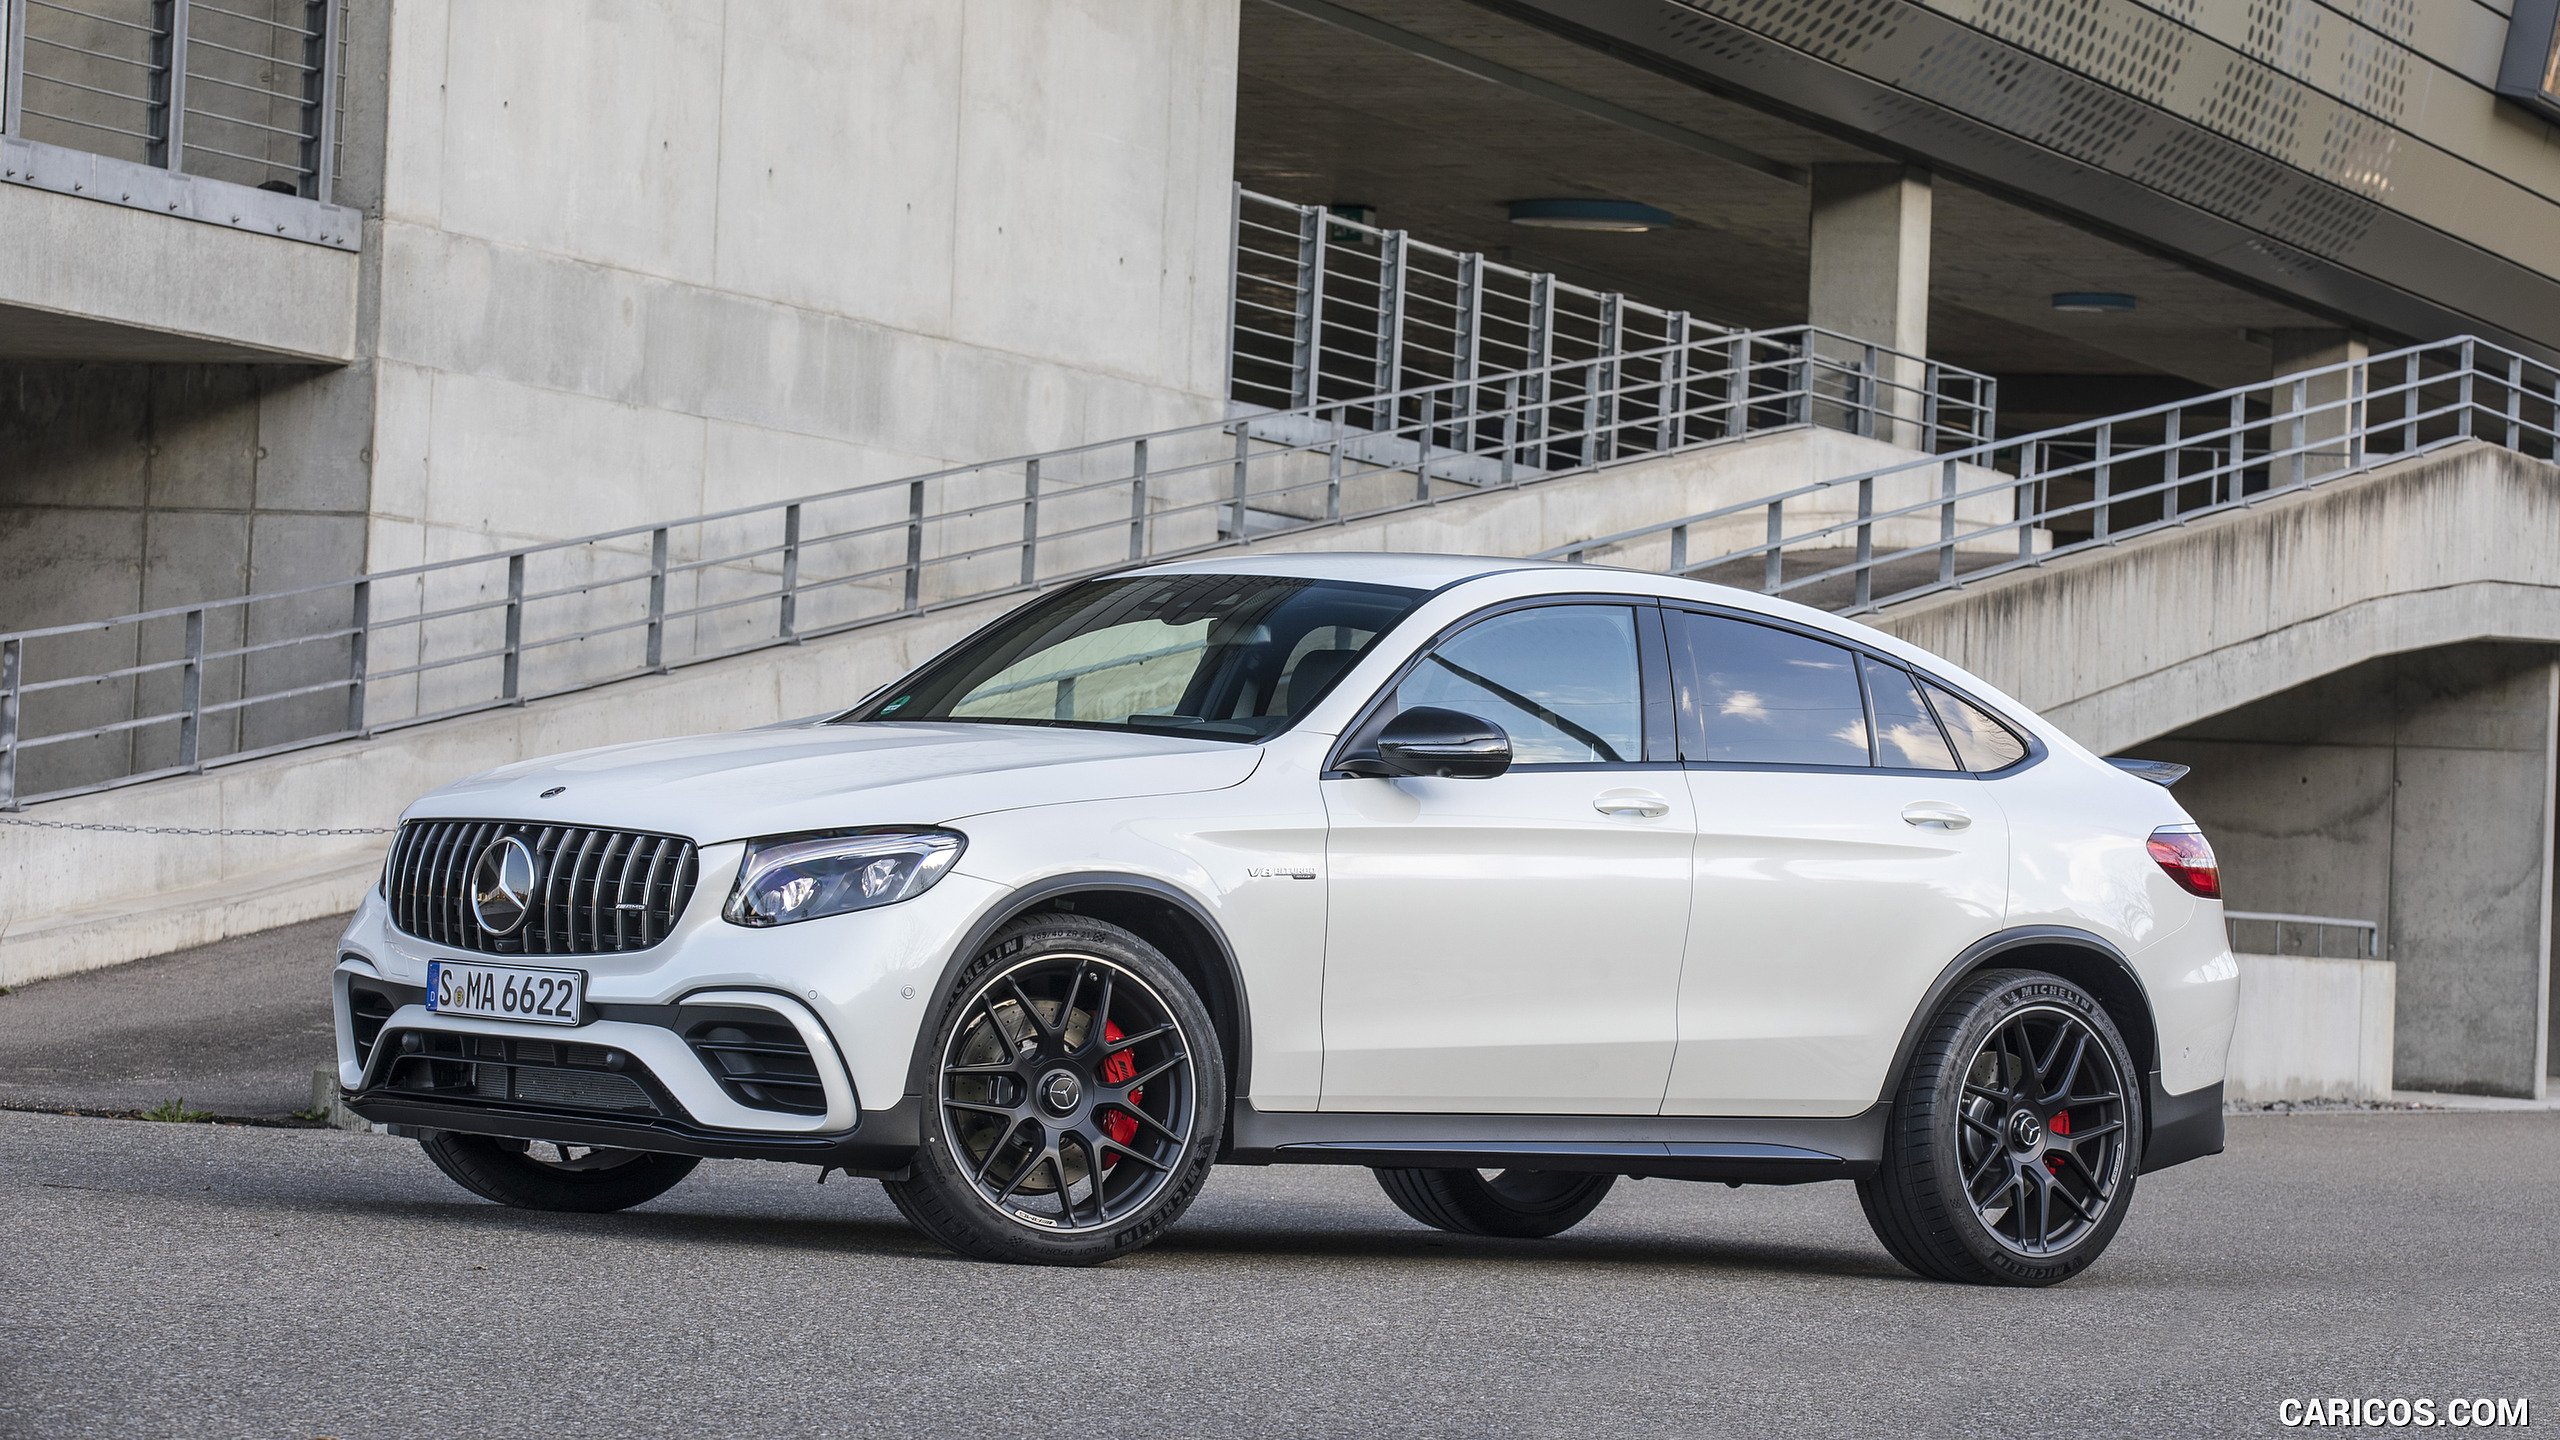 2018 Mercedes-AMG GLC 63 S Coupe - Front Three-Quarter, #52 of 75